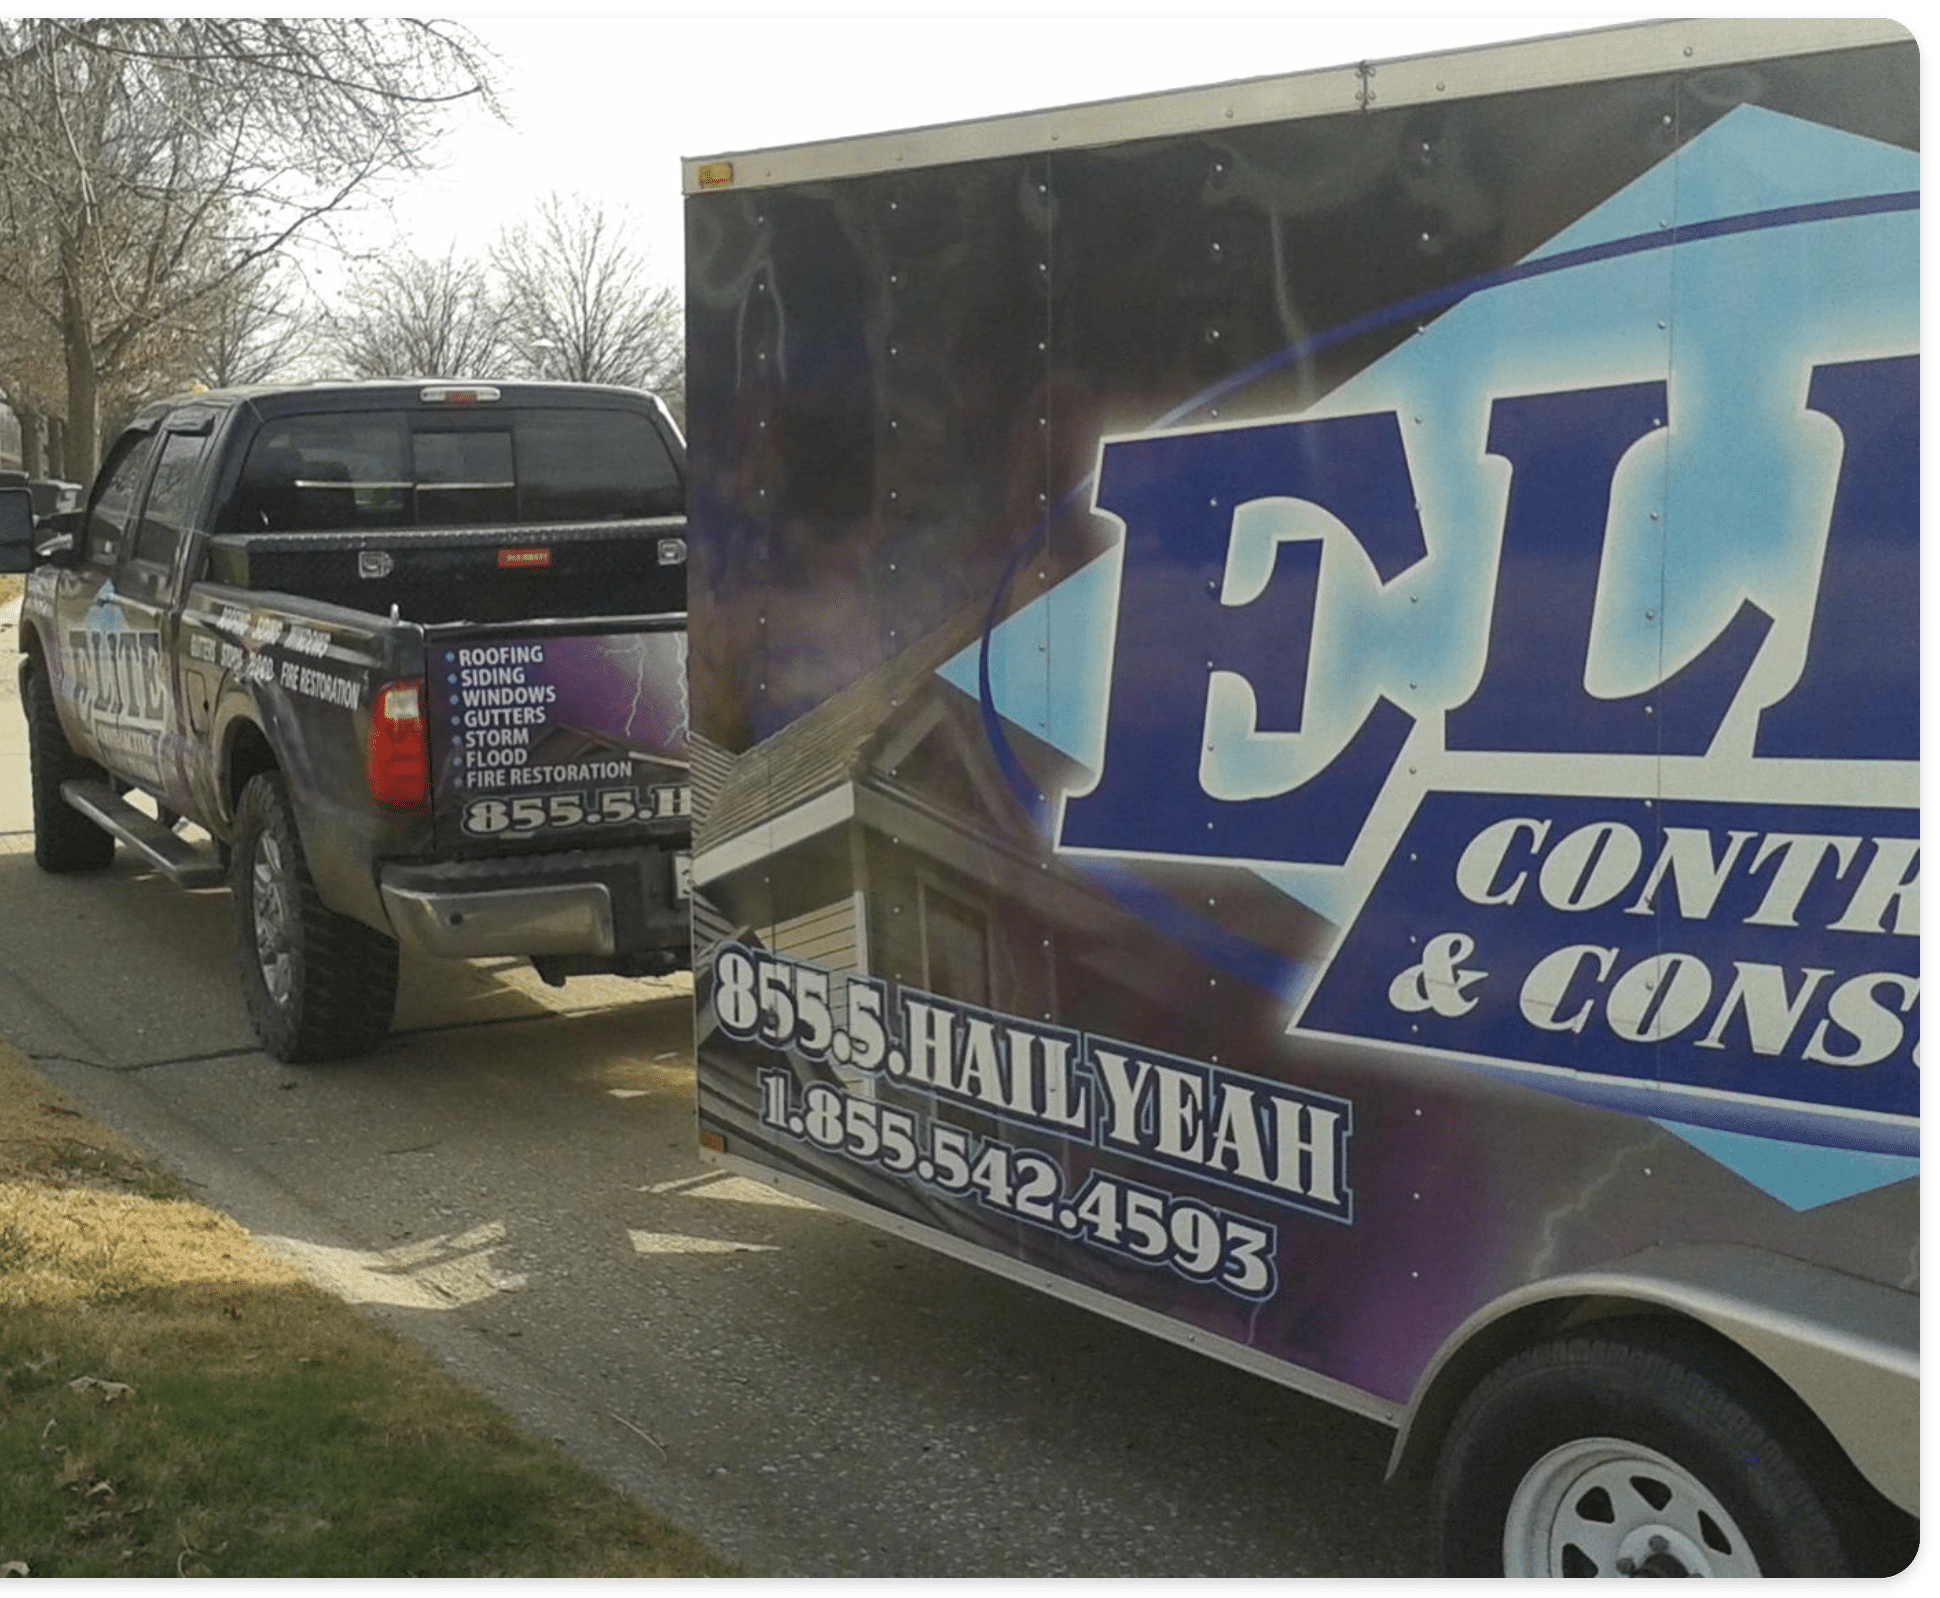 Elite Contracting and Constrution Truck